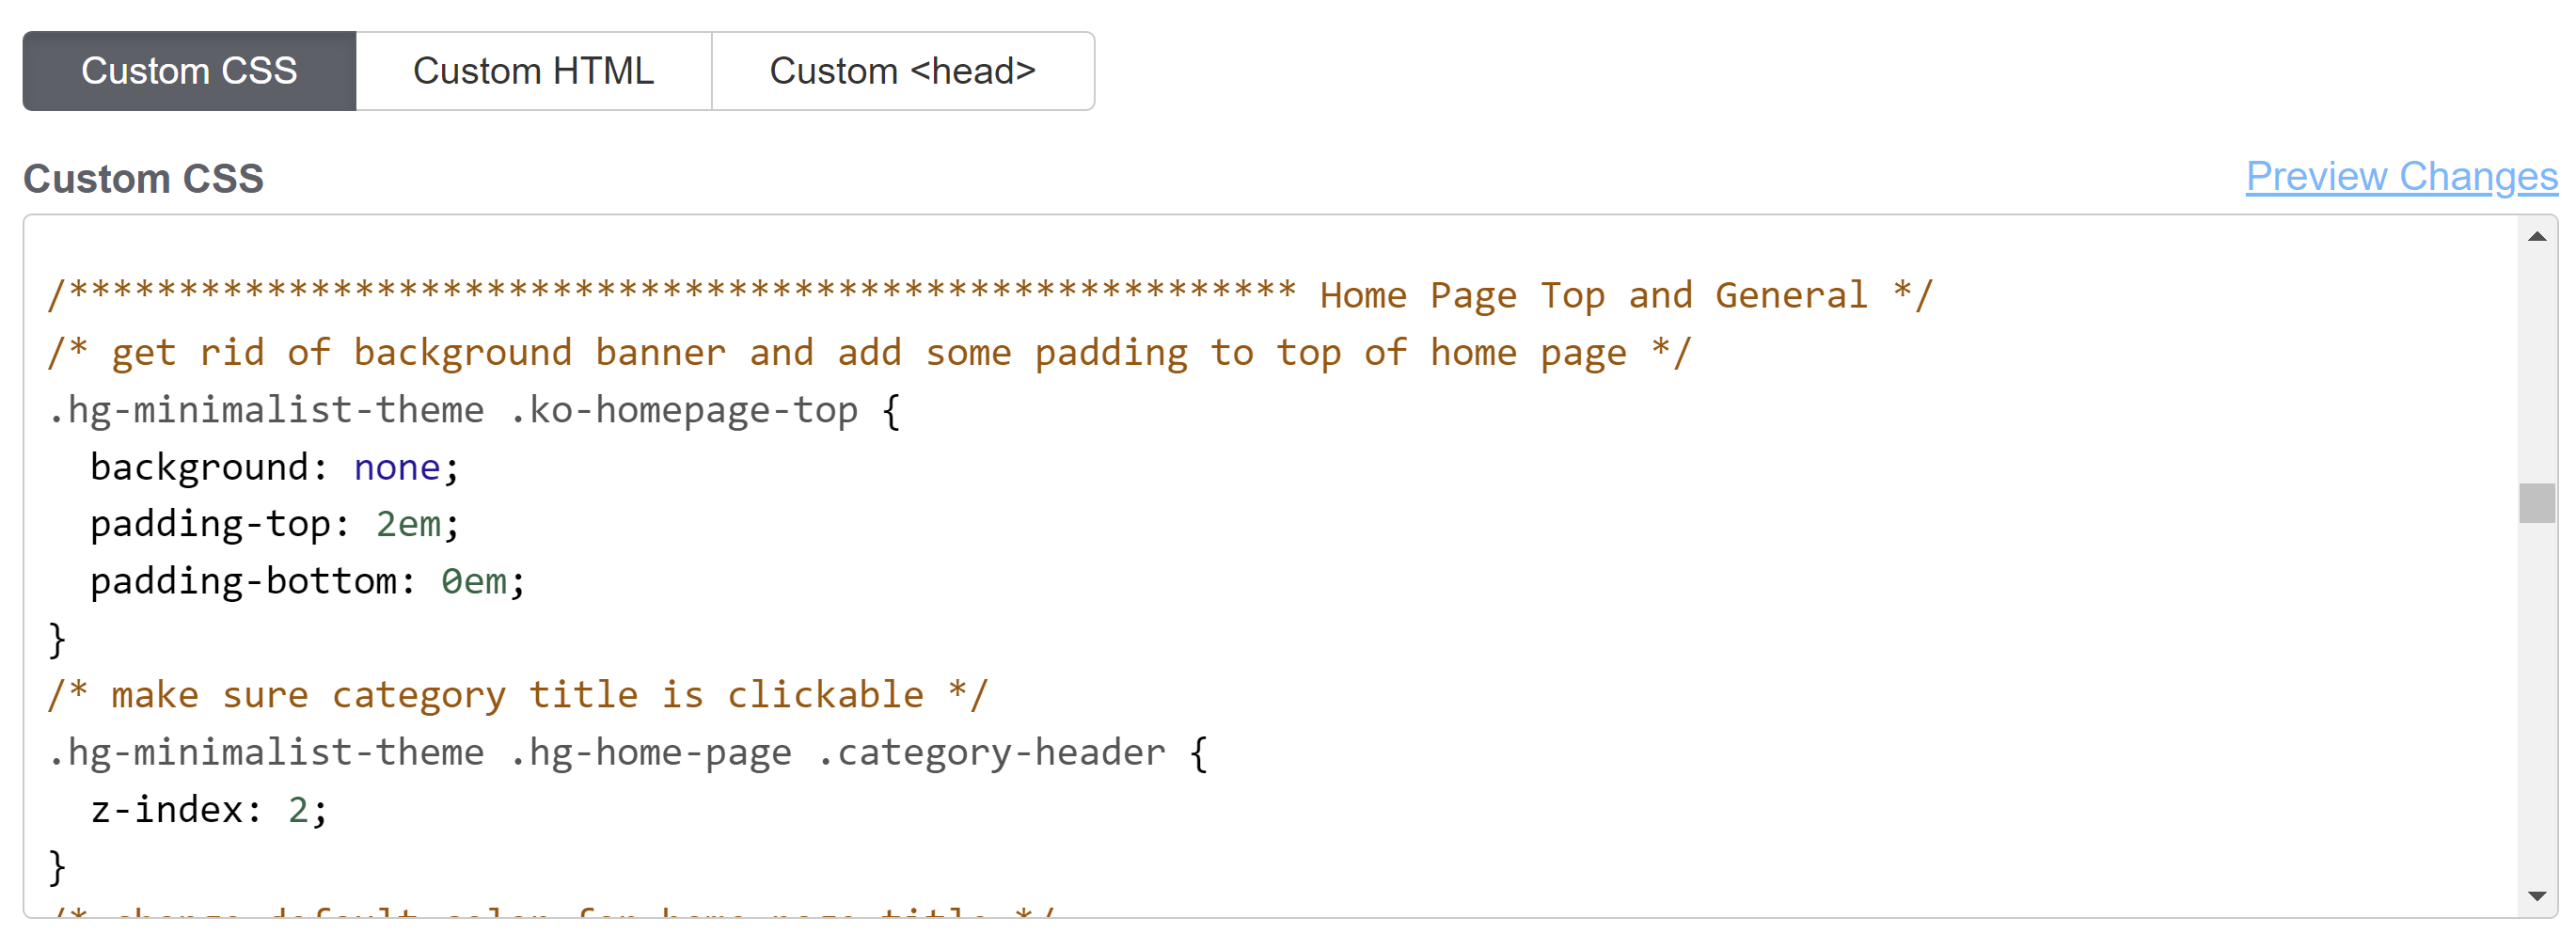 The Custom CSS section of the Style Settings page, scrolled to the "Home Page Top and General" section.